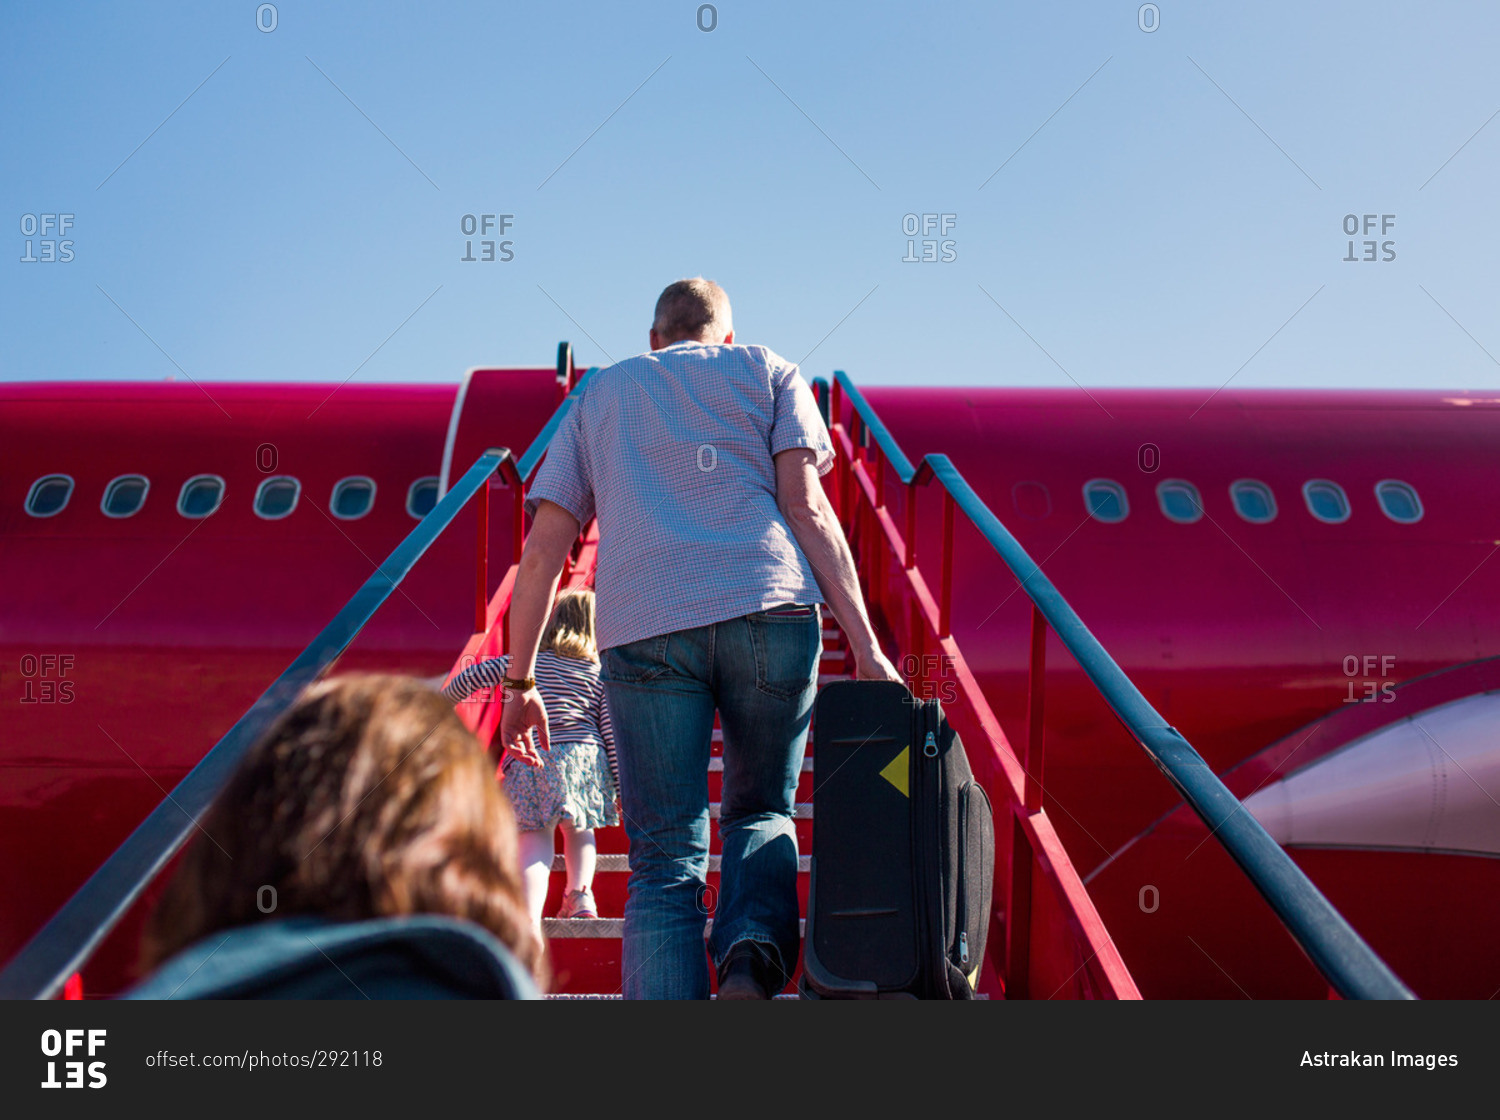 People climbing steps to board plane